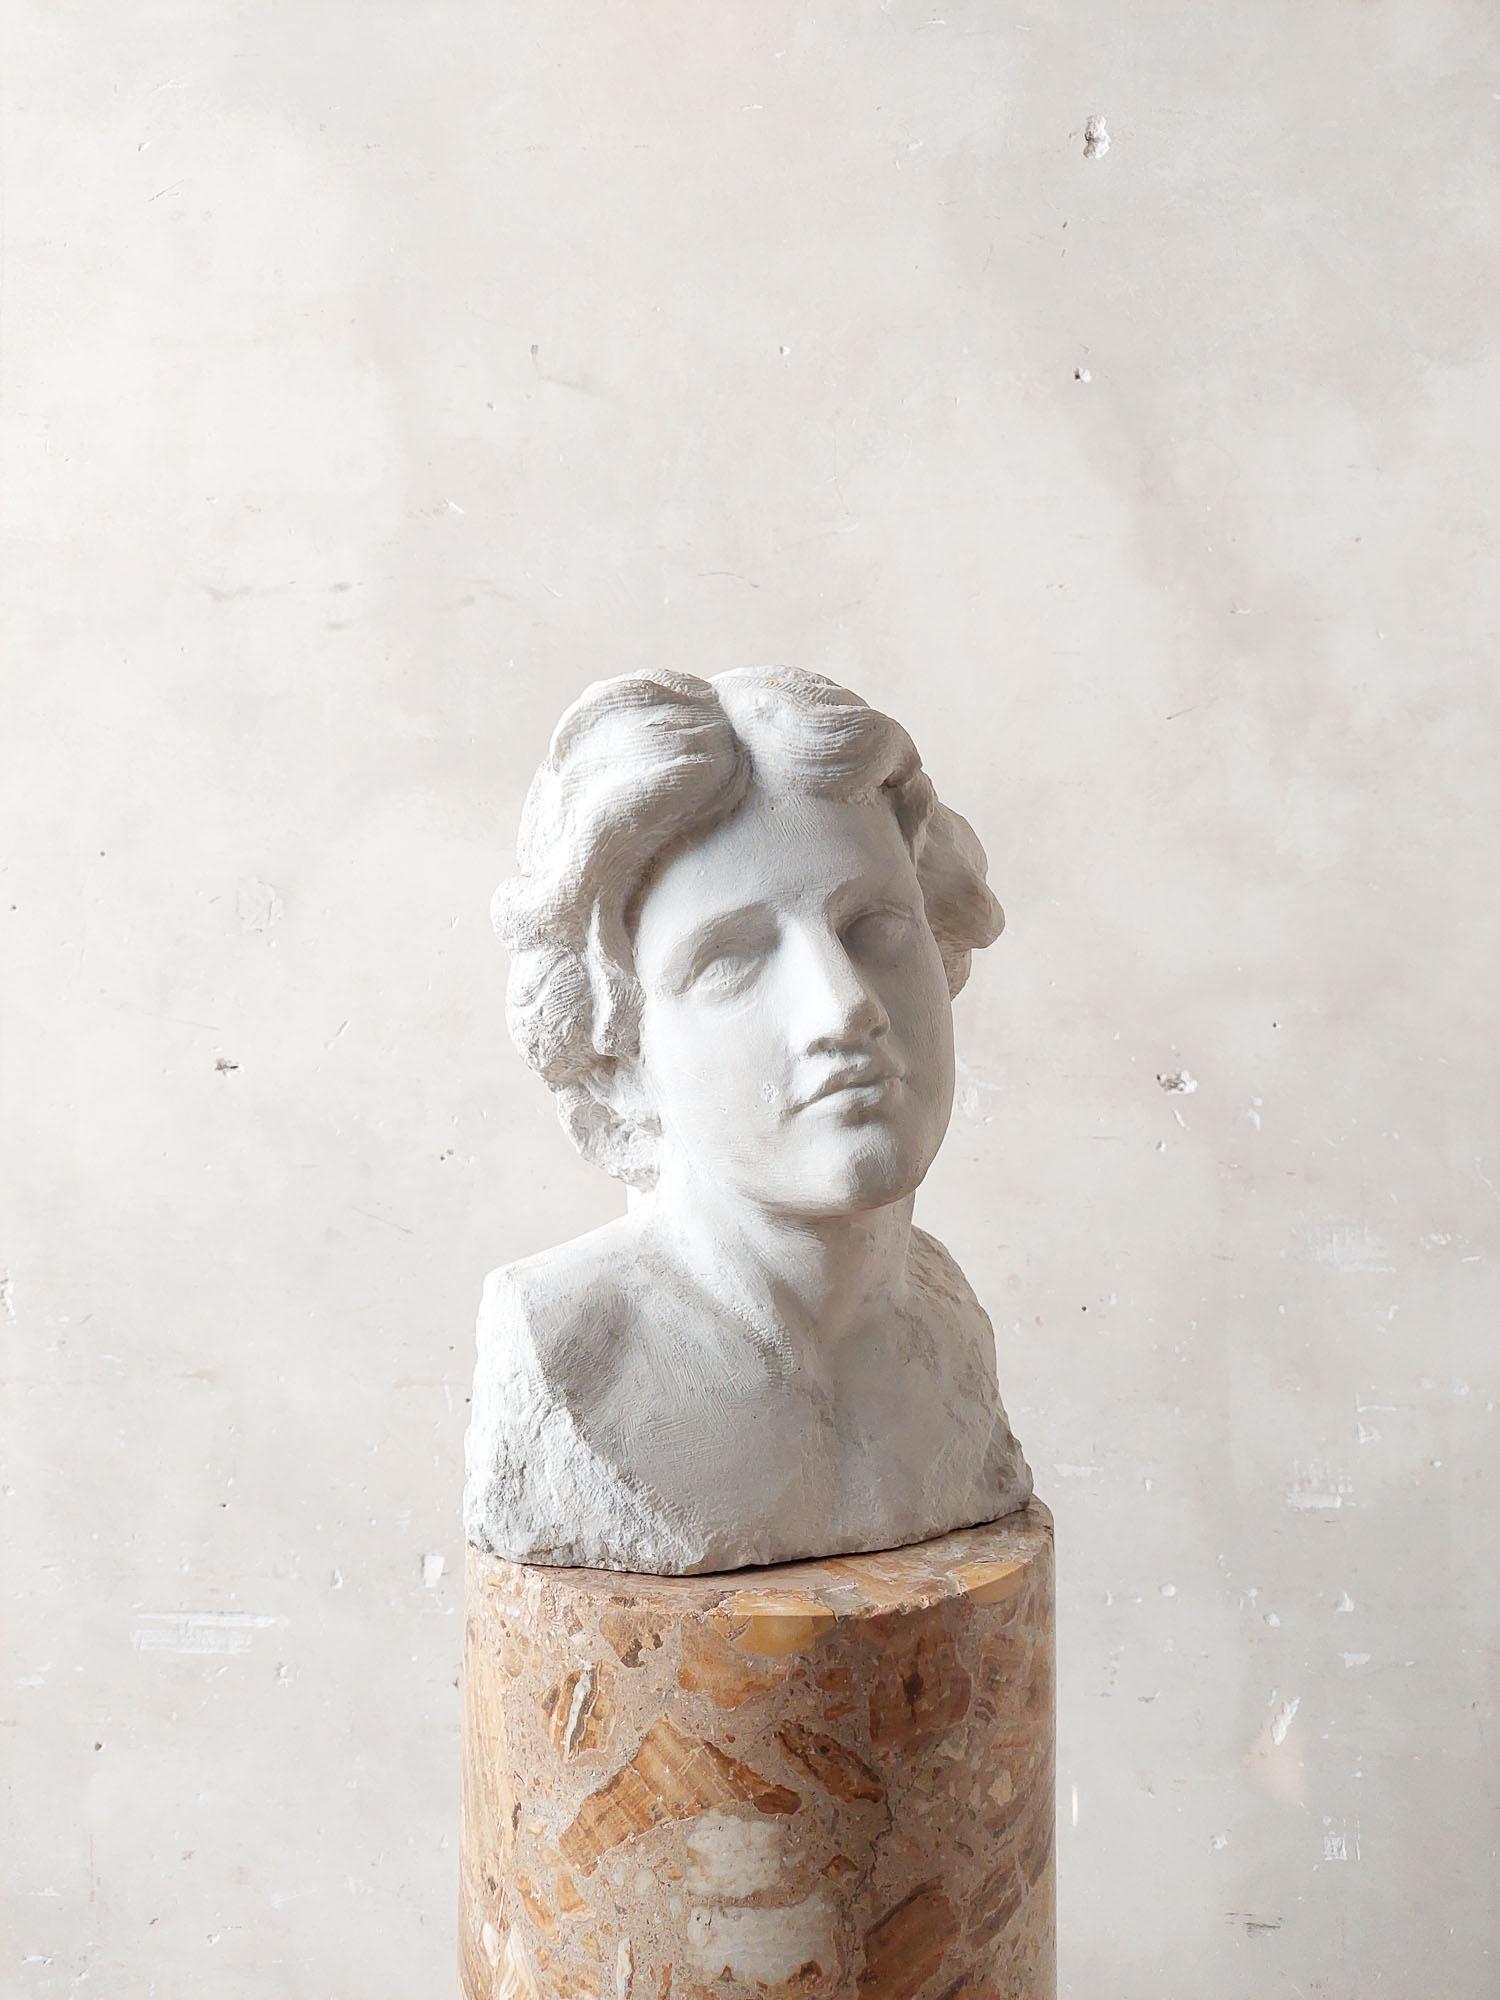 Antique carrara marble hand-carved bust in white statuario quality marble.

h 47 x w 32 x d 29 cm